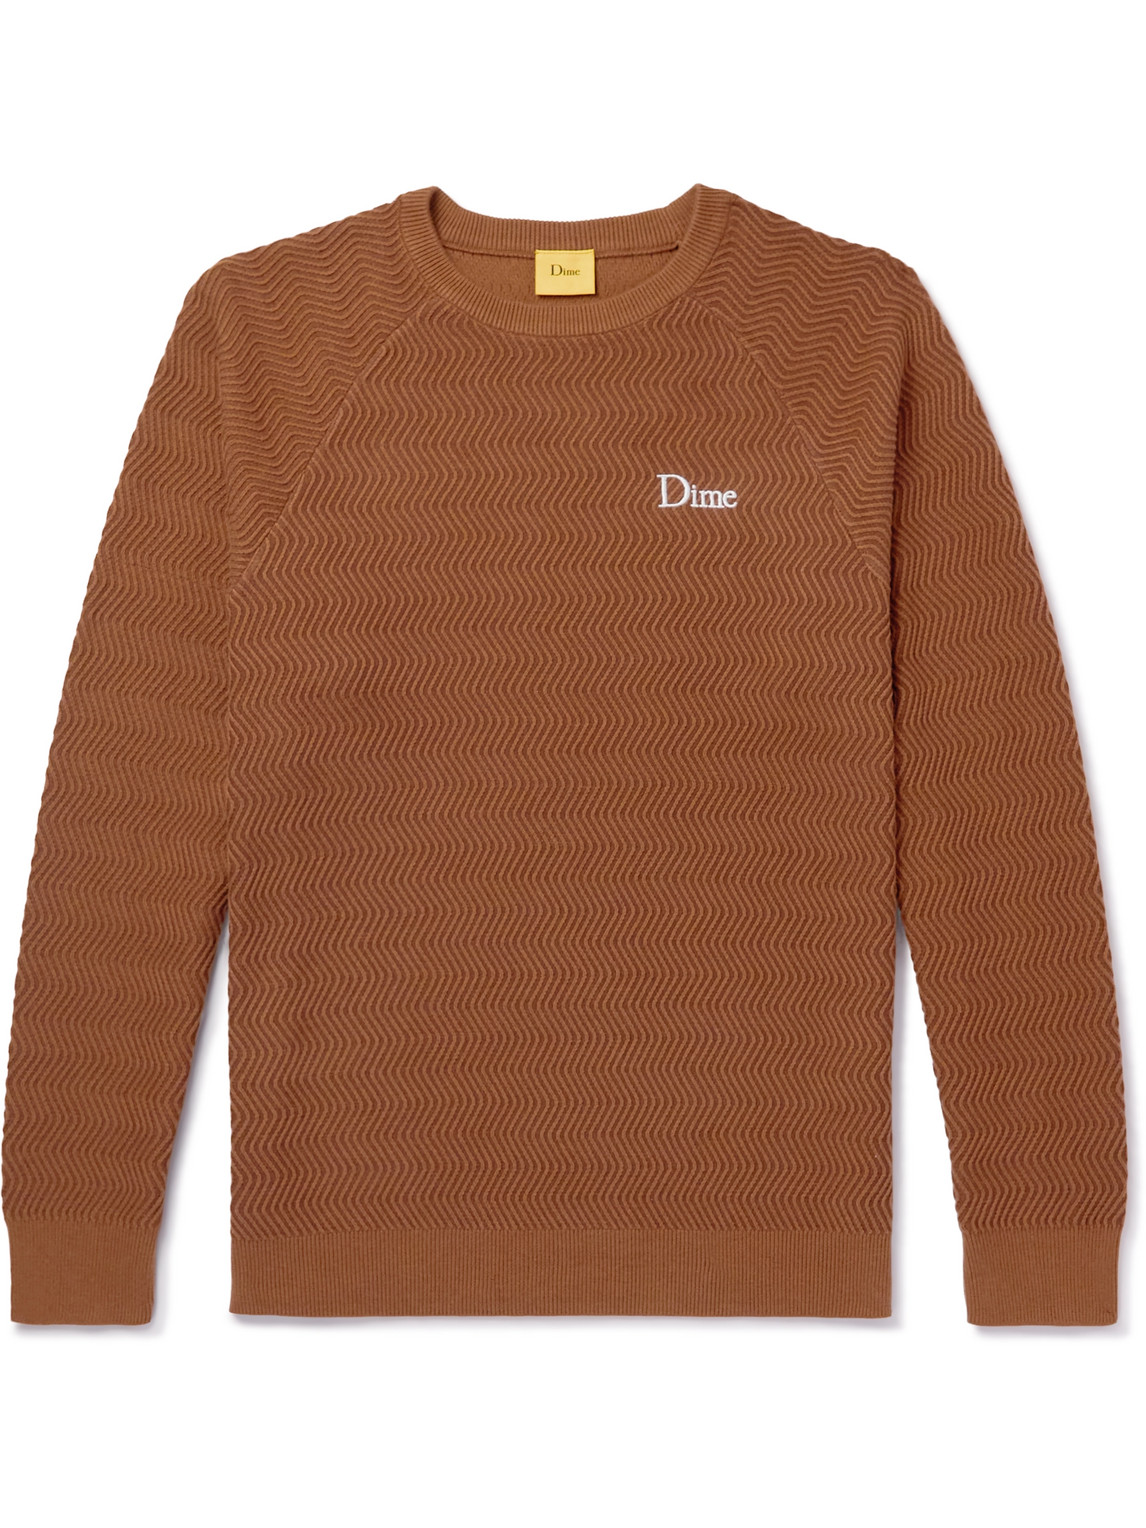 DIME Logo-Embroidered Cable-Knit Cotton Sweater